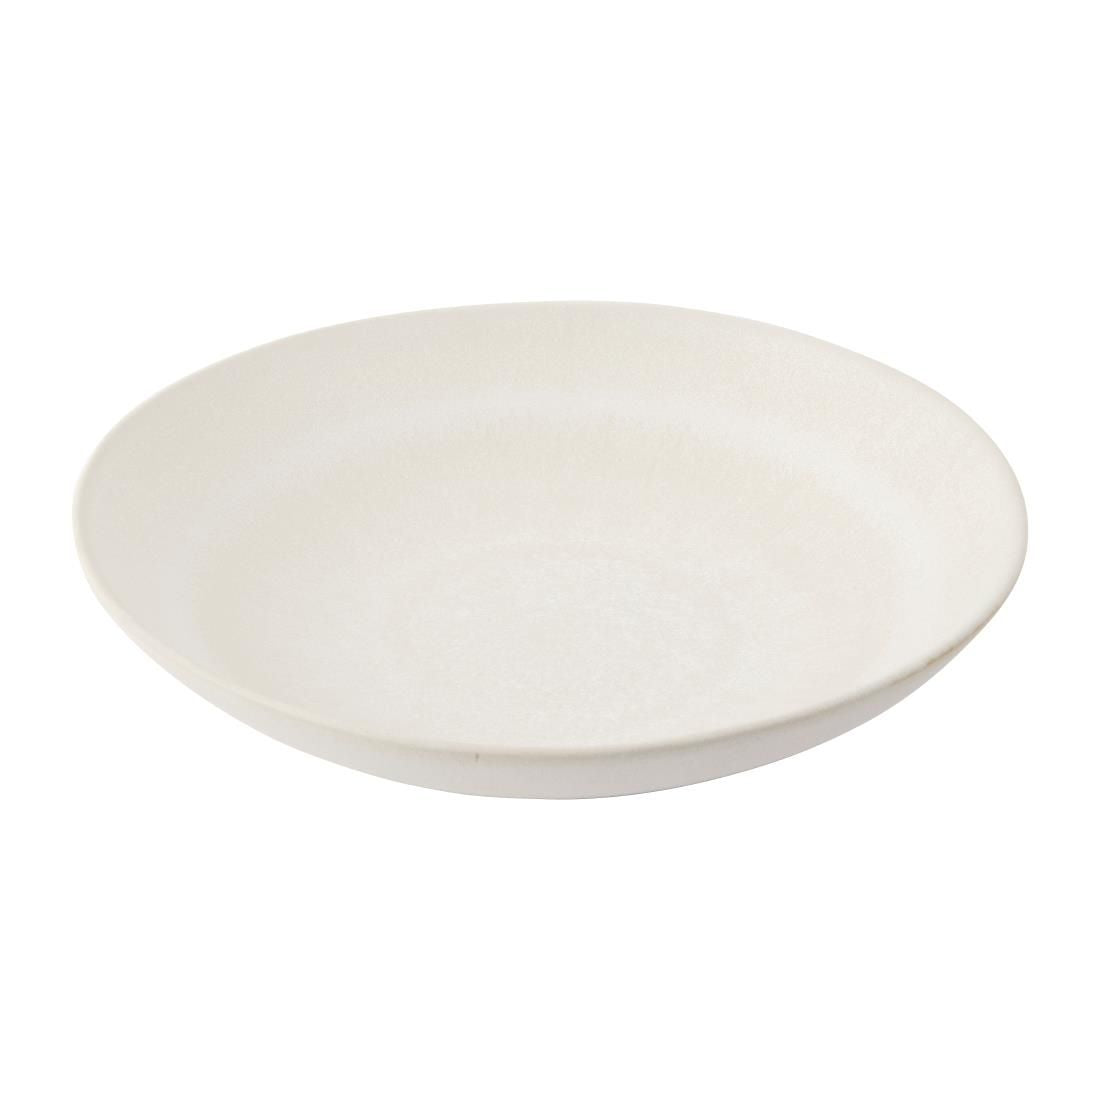 FC705 Olympia Build-a-Bowl White Flat Bowls 250mm (Pack of 4) JD Catering Equipment Solutions Ltd